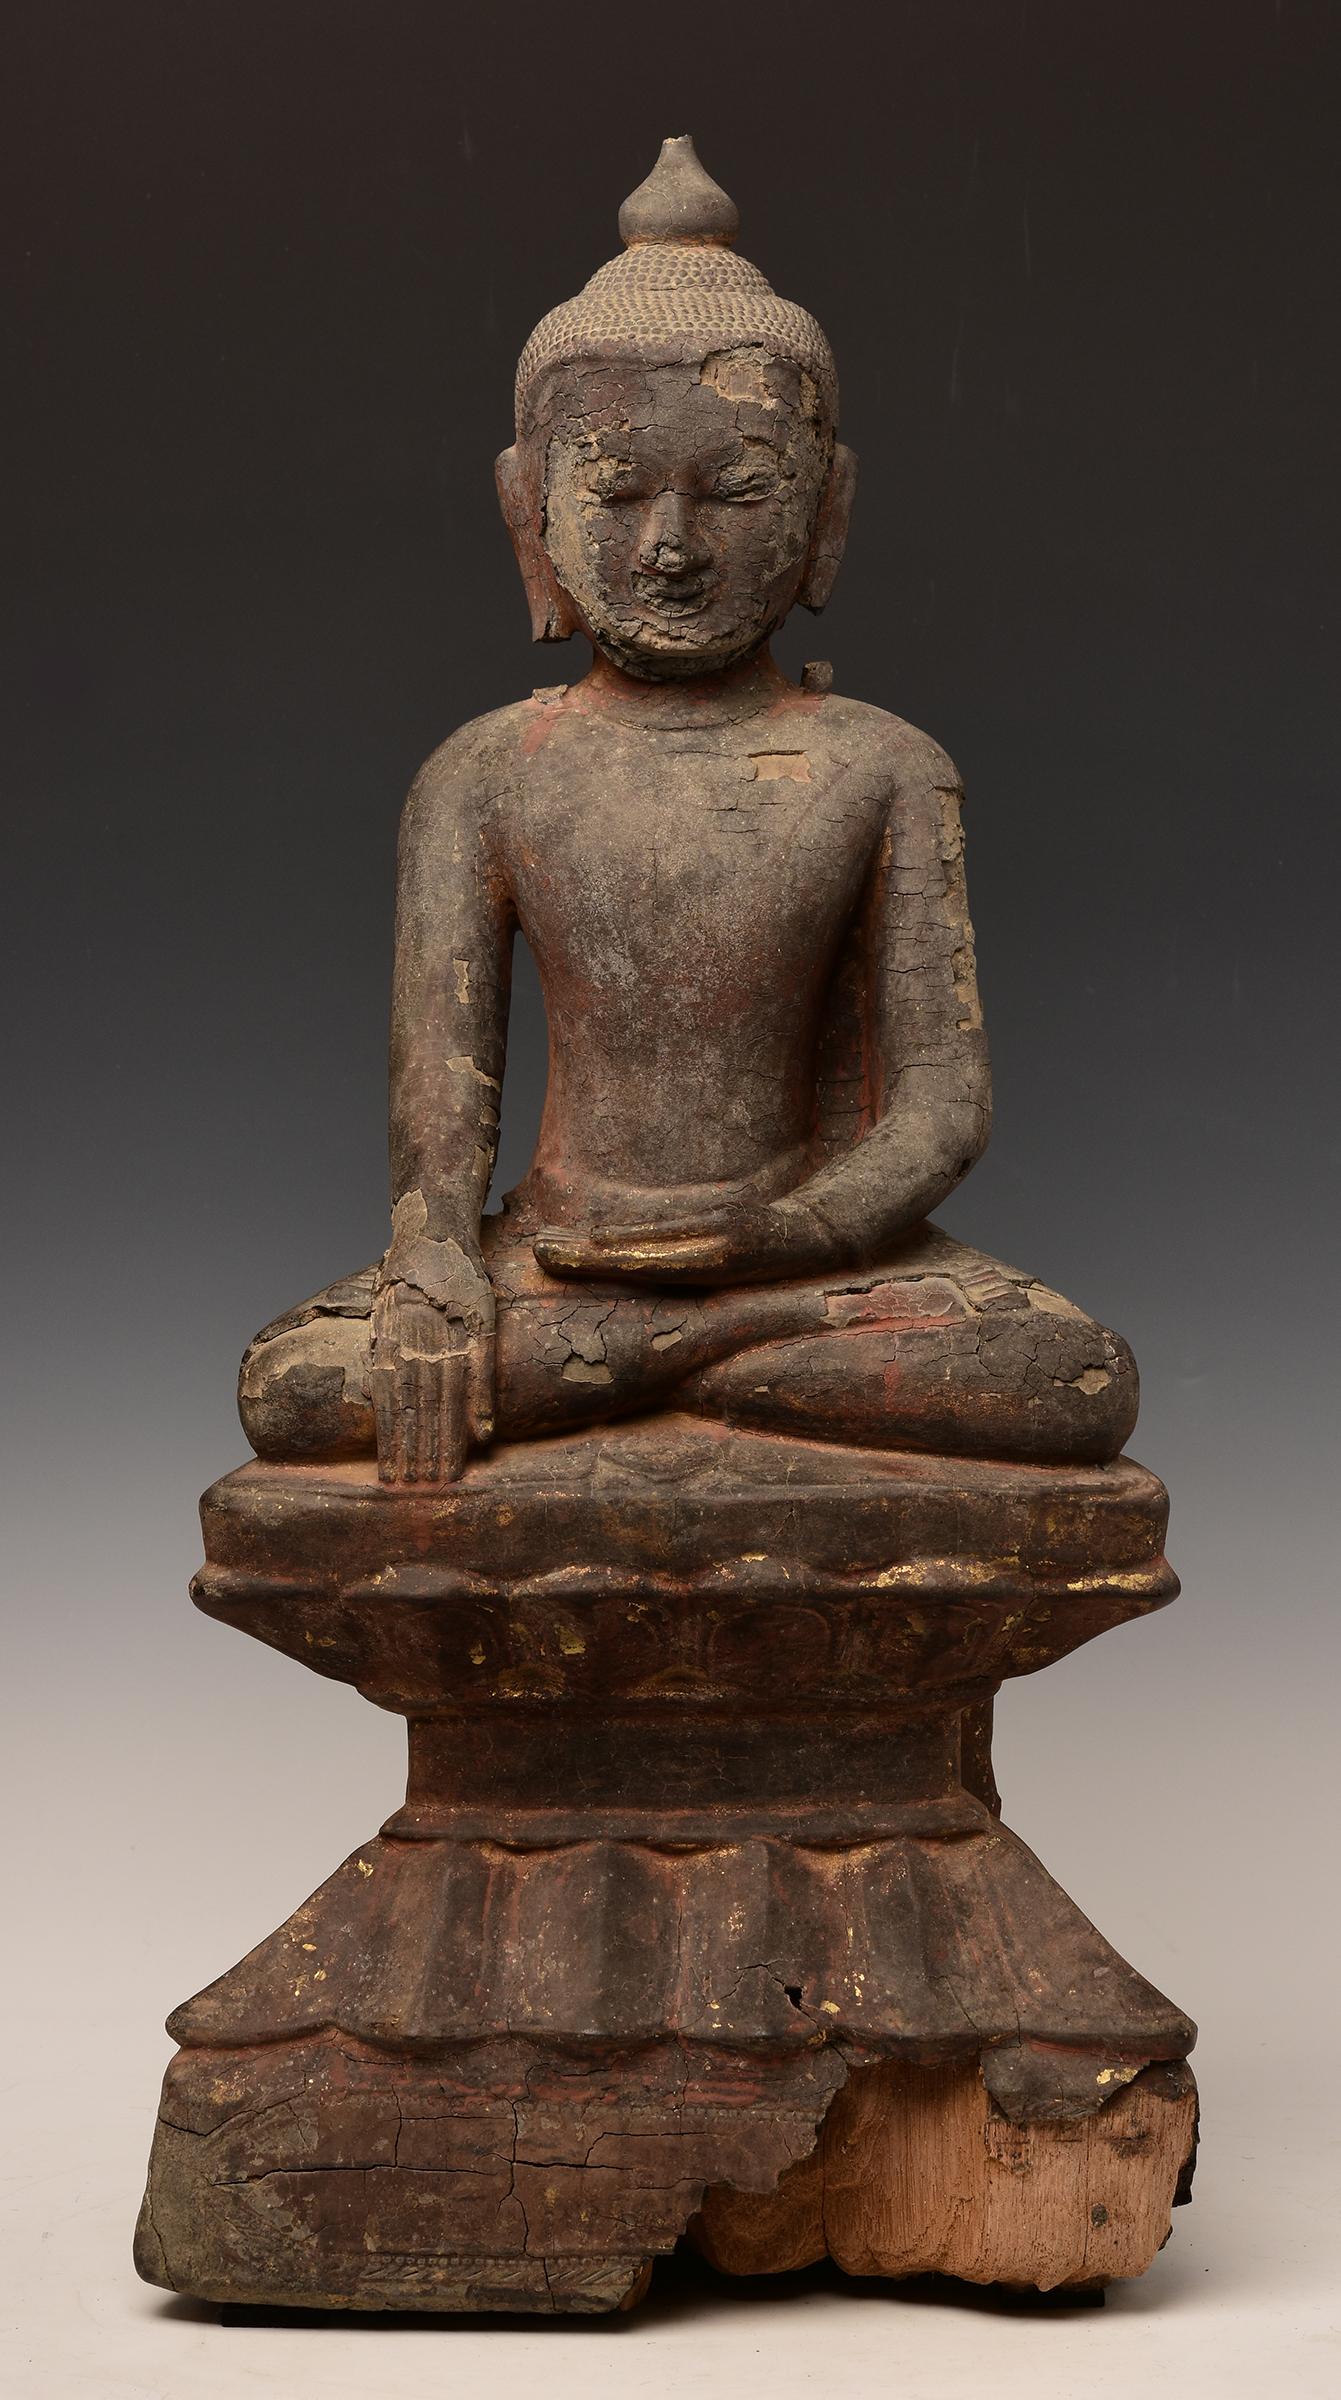 Burmese wooden Buddha sitting in Mara Vijaya (calling the earth to witness) posture on a base.

Age: Burma, Ava Period, 15th Century
Size: Height 60 C.M. / Width 29 C.M.
Condition: Intact with original condition.

100% Satisfaction and authenticity